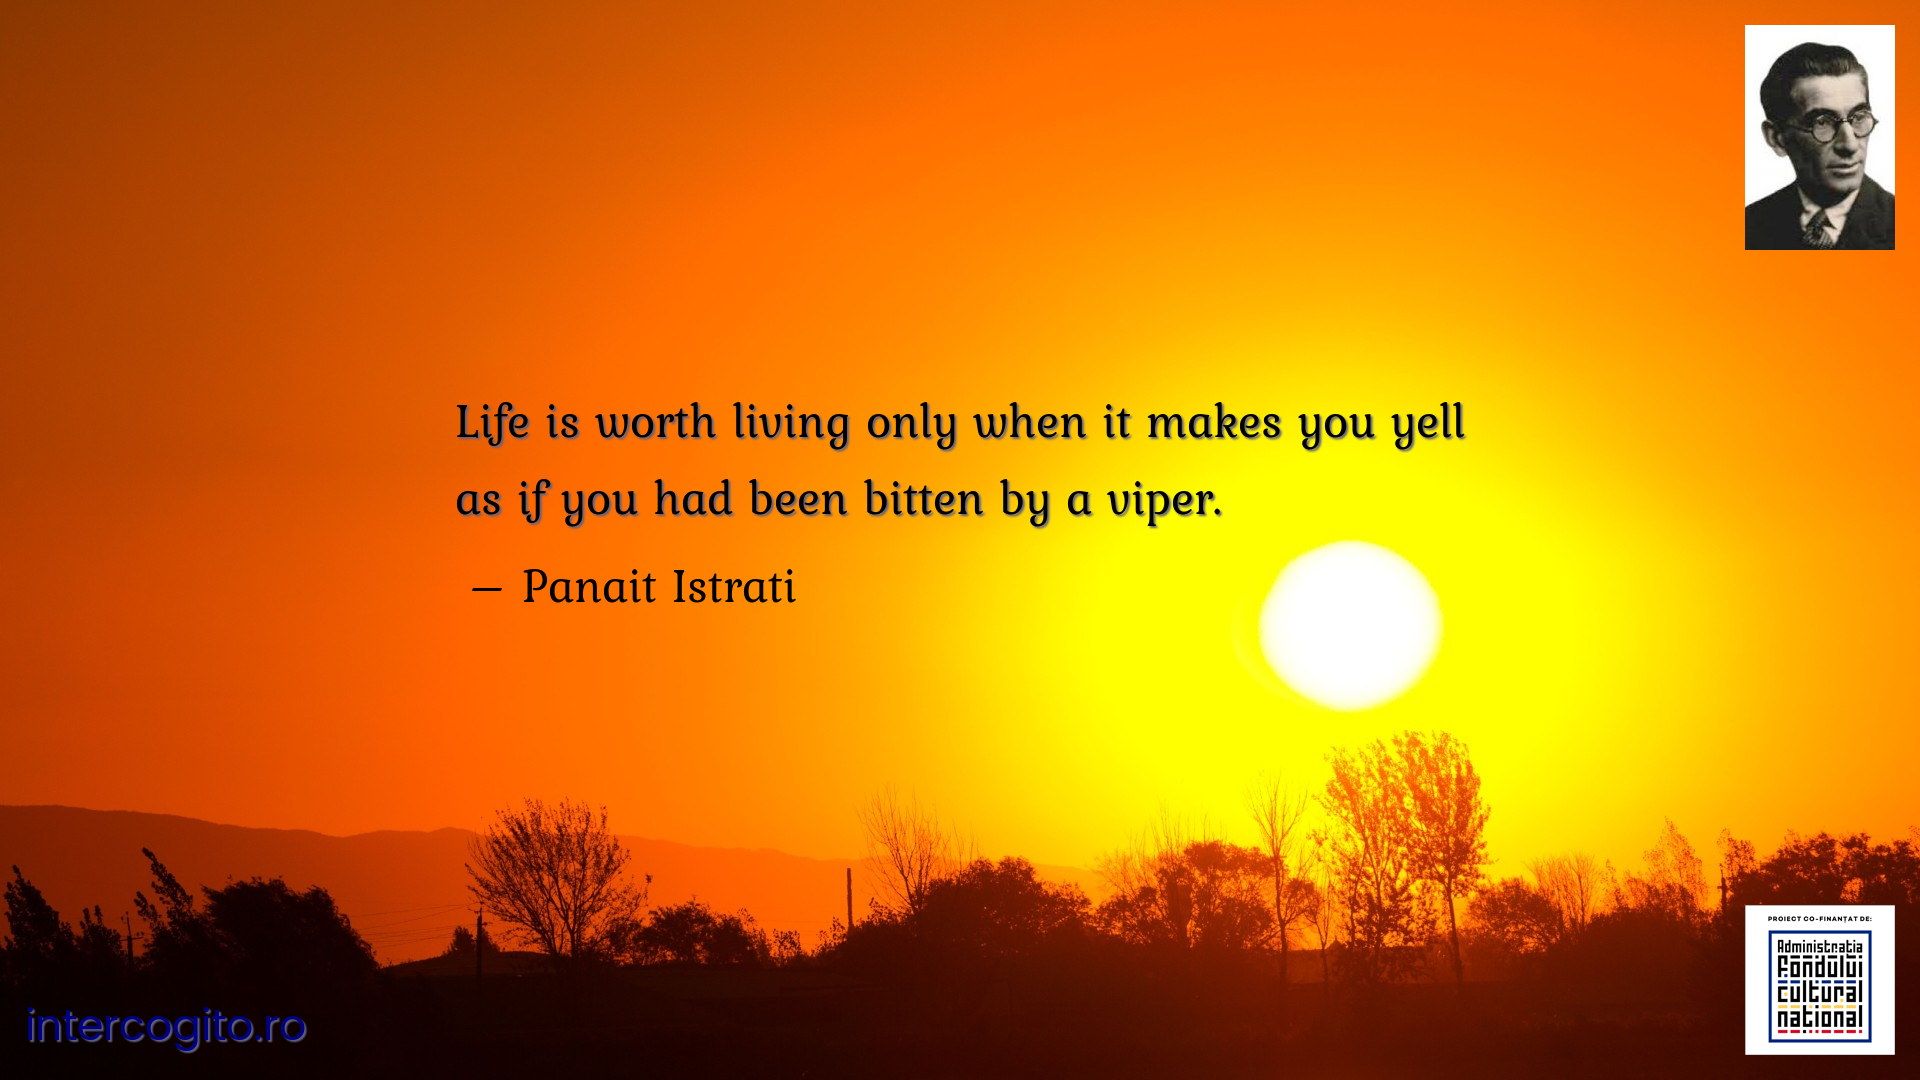 Life is worth living only when it makes you yell as if you had been bitten by a viper.